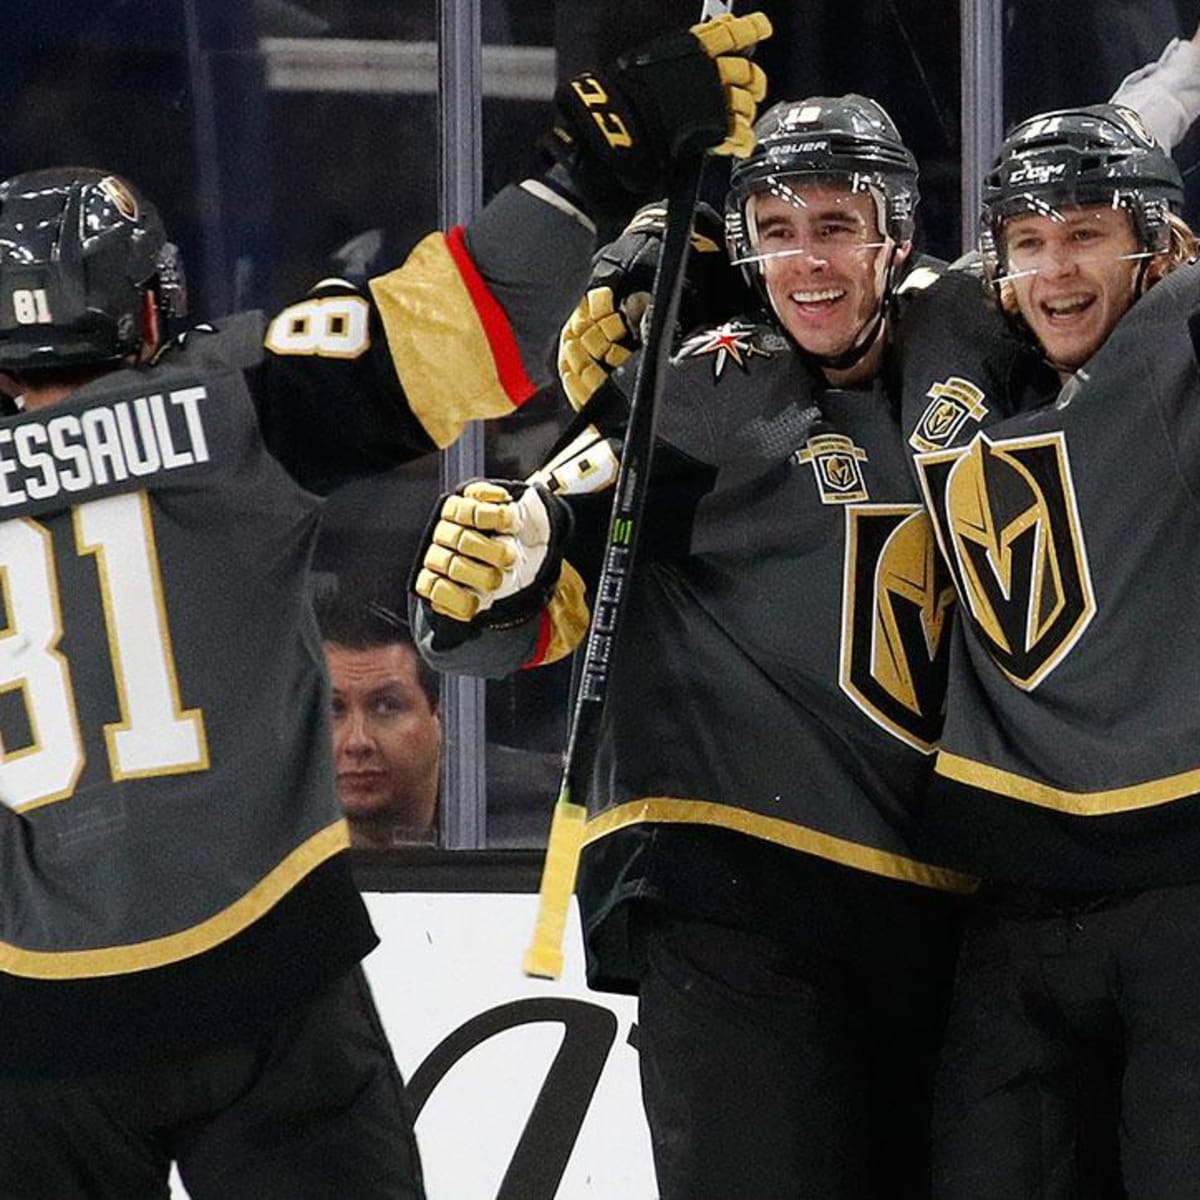 Vegas Golden Knights become fastest NHL expansion team to reach 20